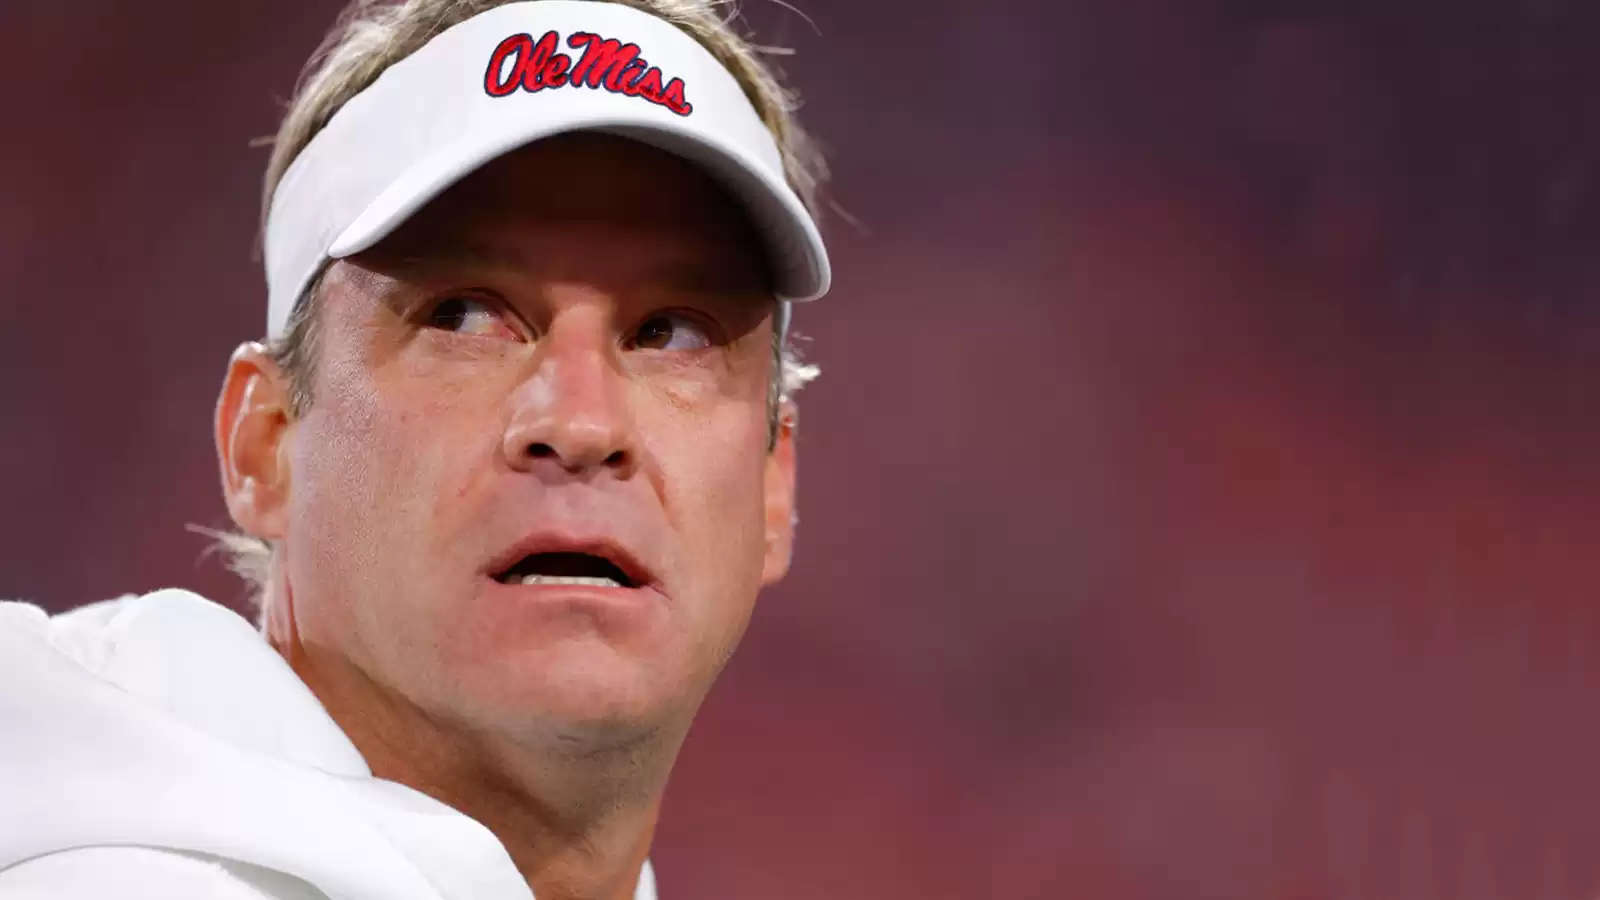 Ole Miss Football player sues Lane Kiffin for $40 million using teammate's dead father as leverage